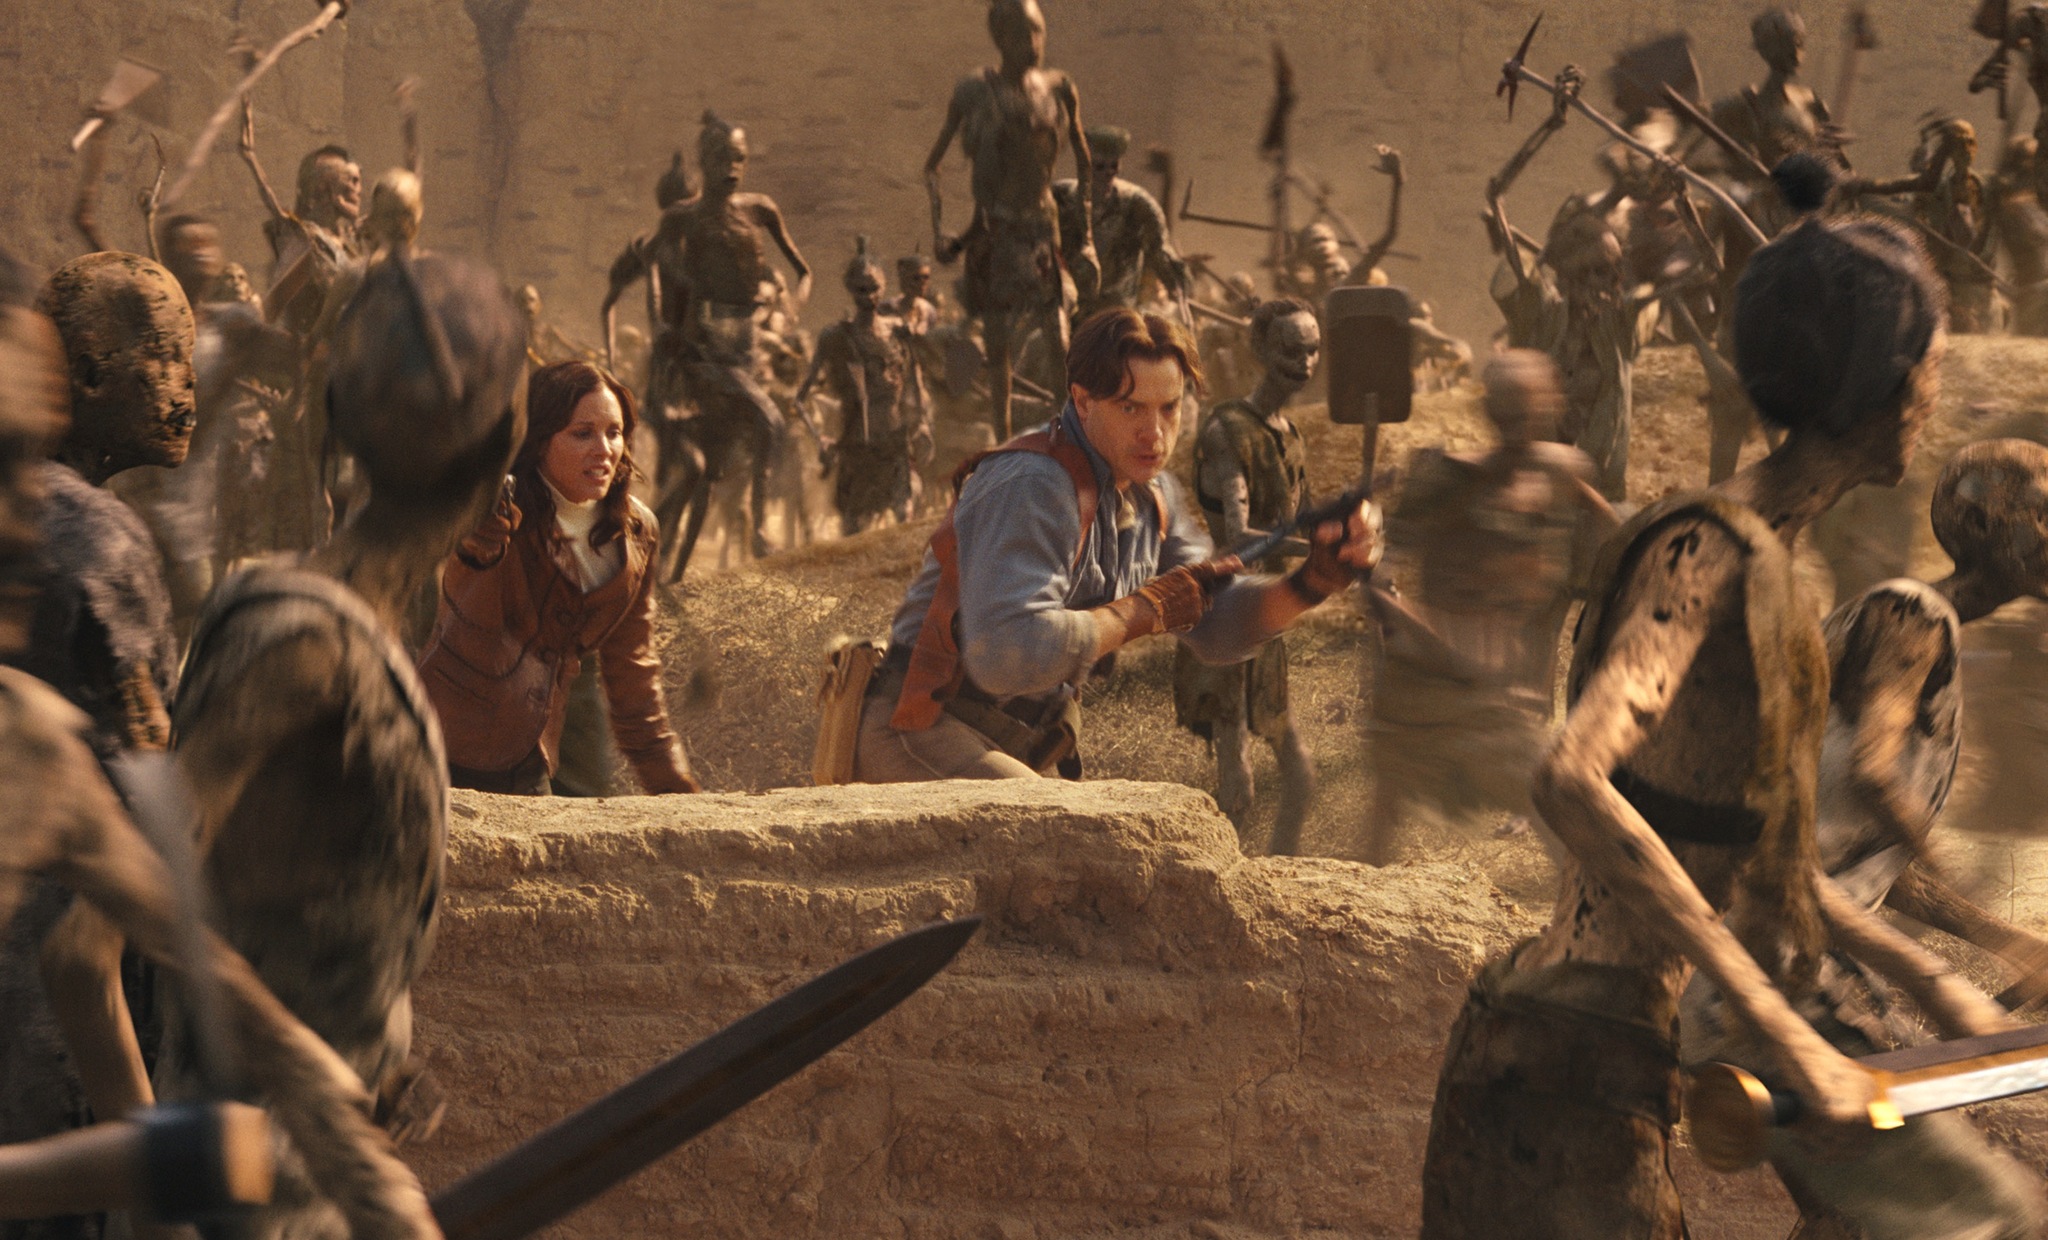 Still of Brendan Fraser and Maria Bello in The Mummy: Tomb of the Dragon Emperor (2008)